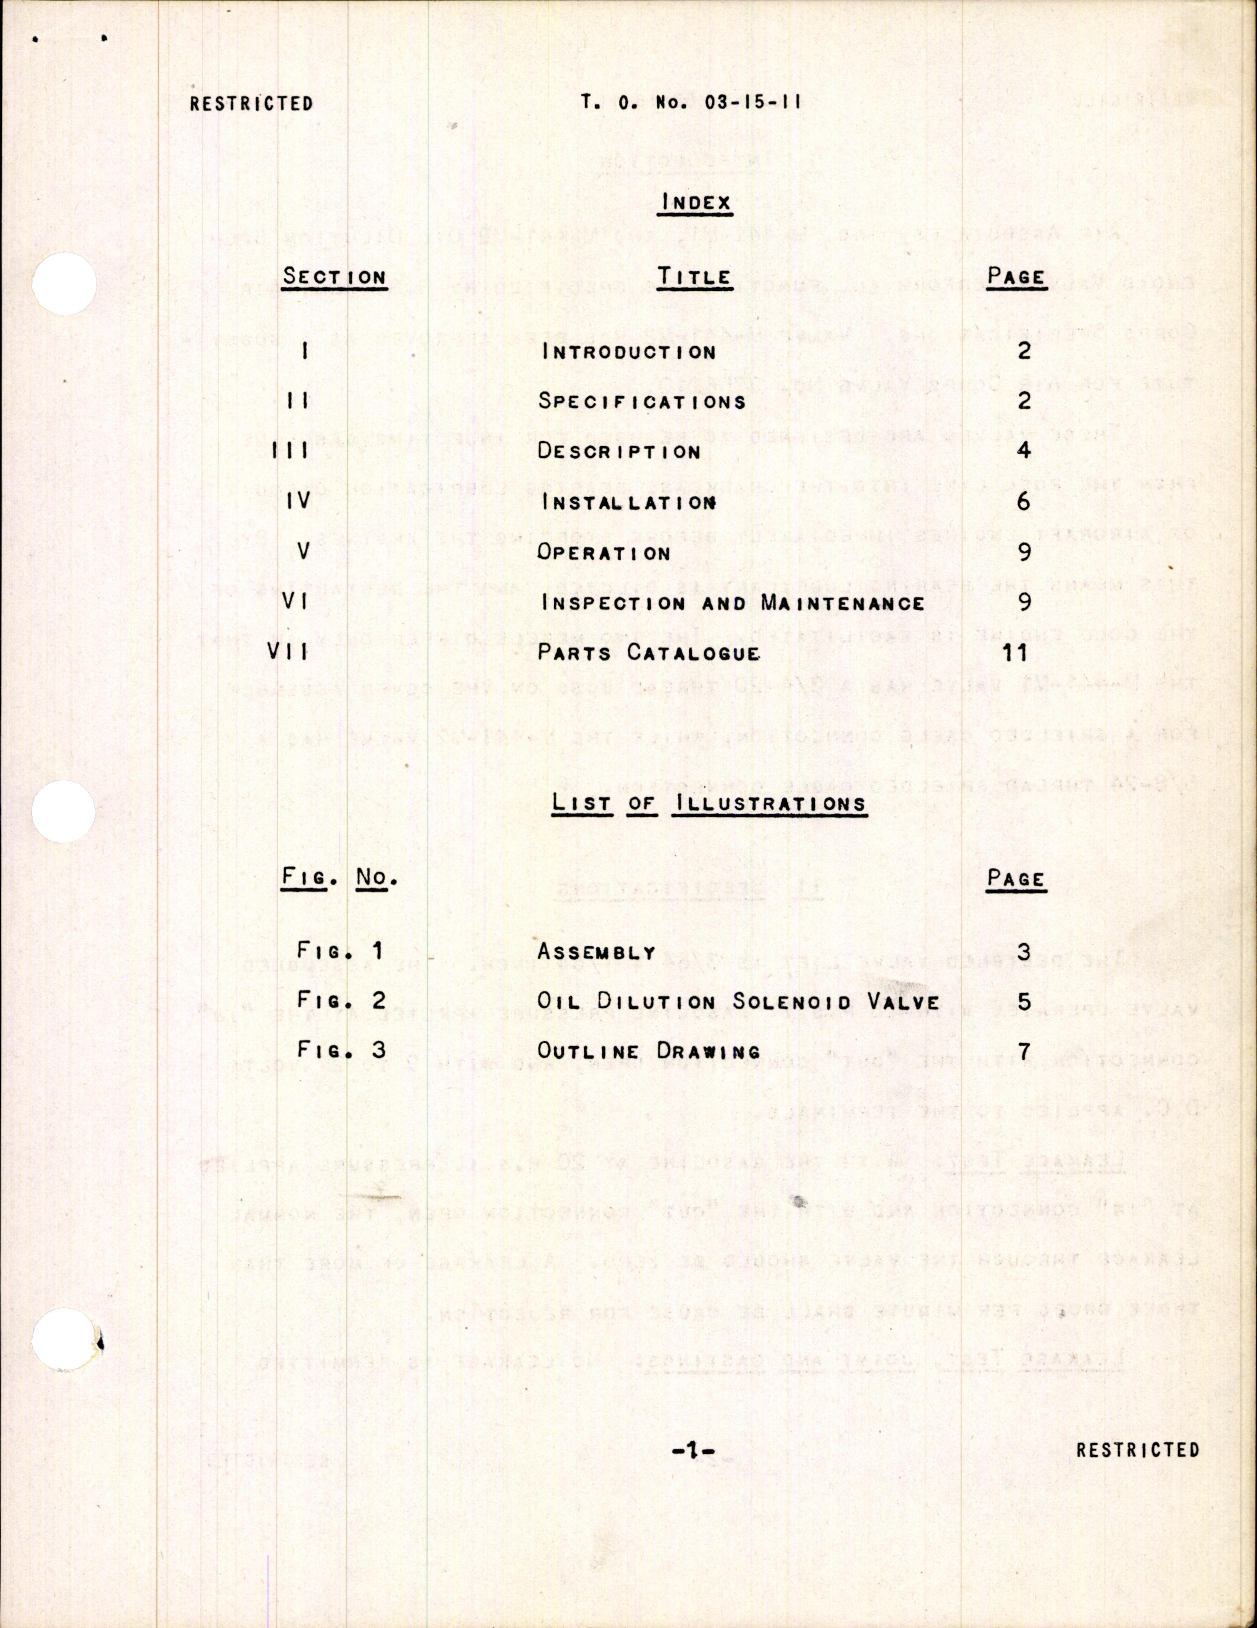 Sample page 3 from AirCorps Library document: Instructions with PC for Oil Dilution Solenoid Valves